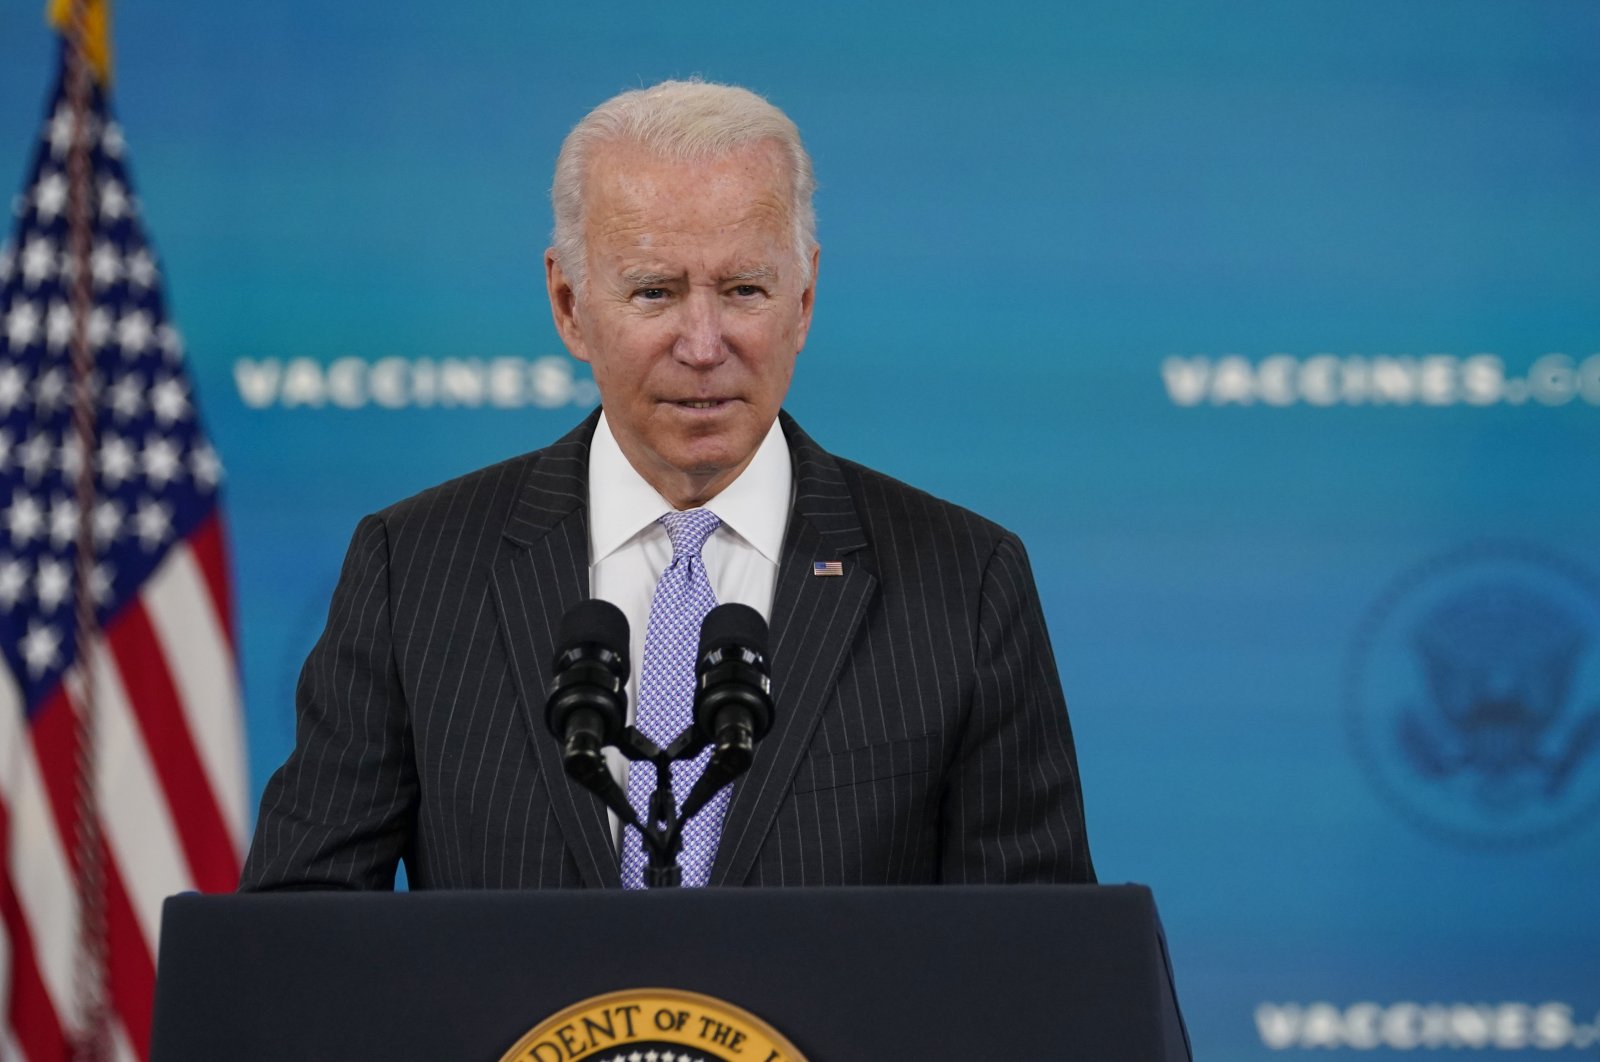 President Joe Biden talks about the newly approved COVID-19 vaccine for children ages 5-11 from the South Court Auditorium on the White House complex in Washington, U.S., Nov. 3, 2021. (AP Photo)